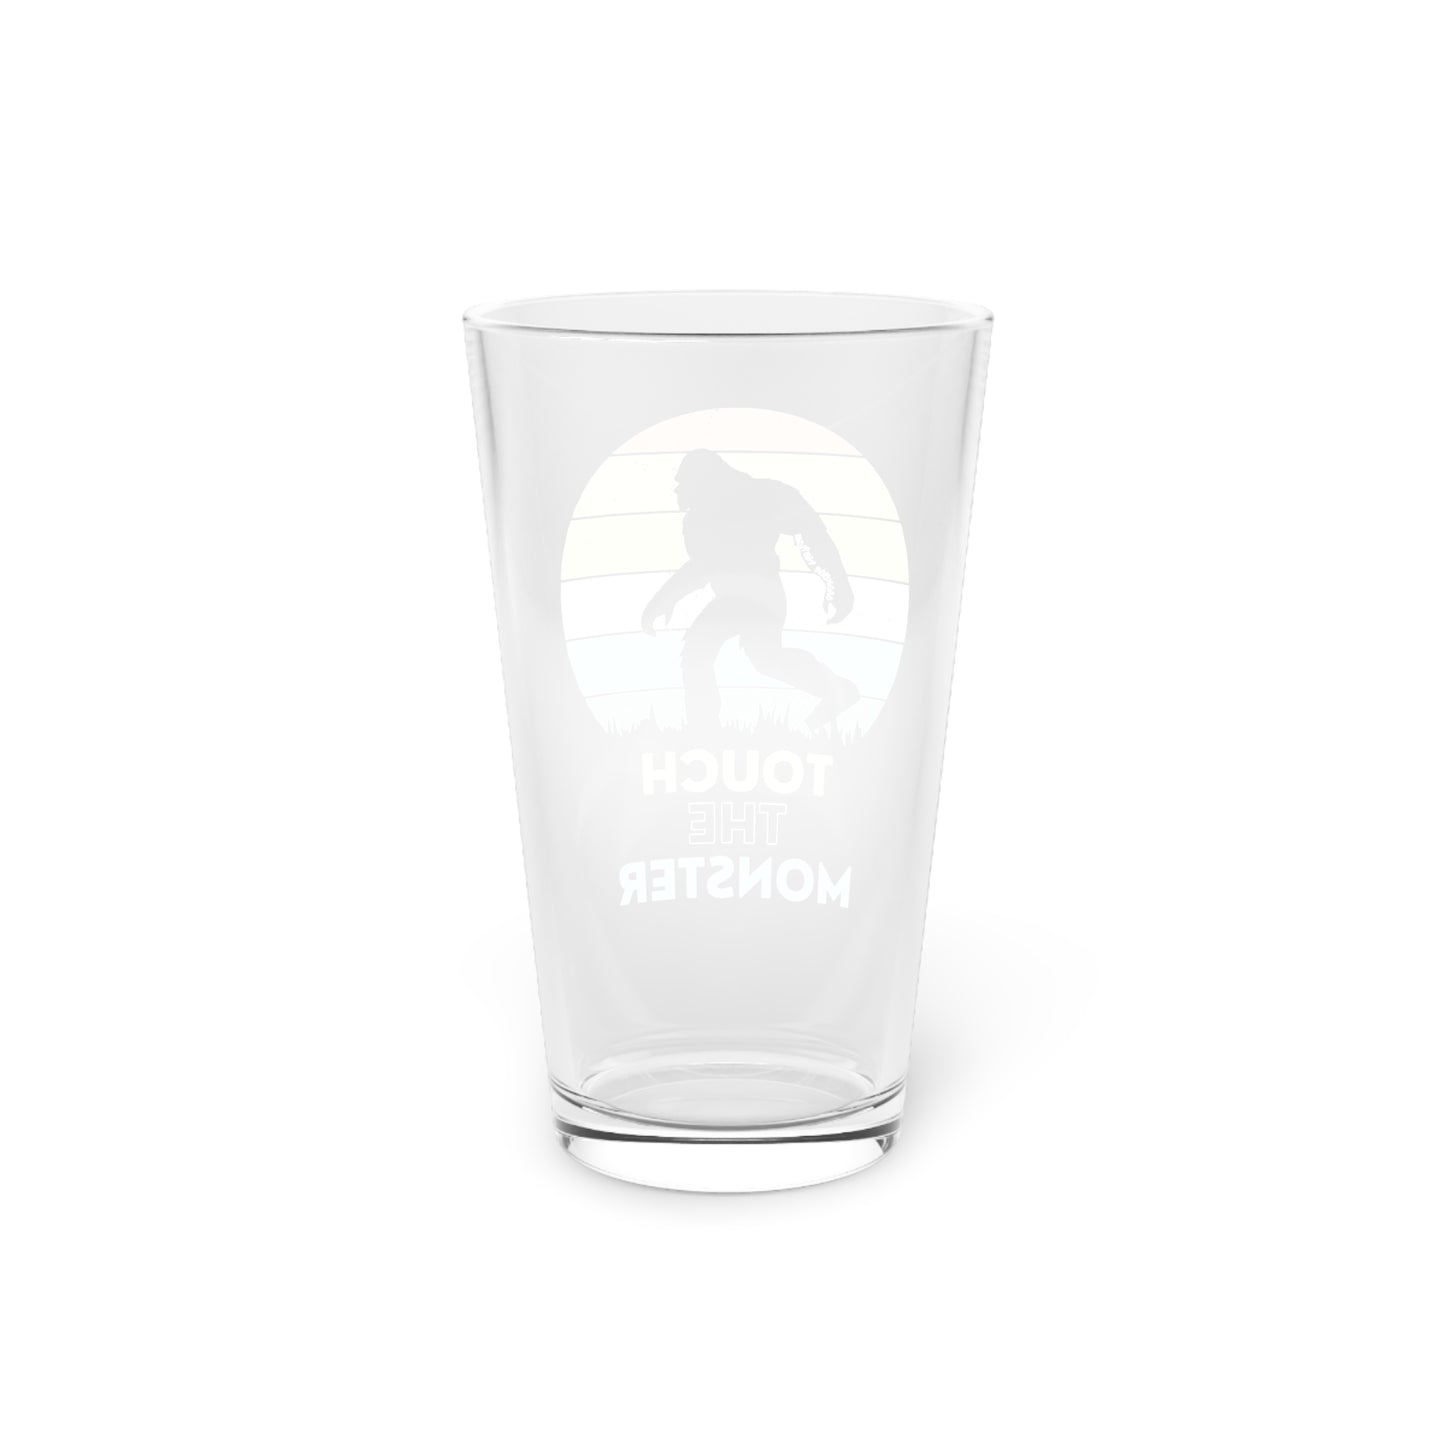 'Touch the Monster' Pint Glass, 16oz